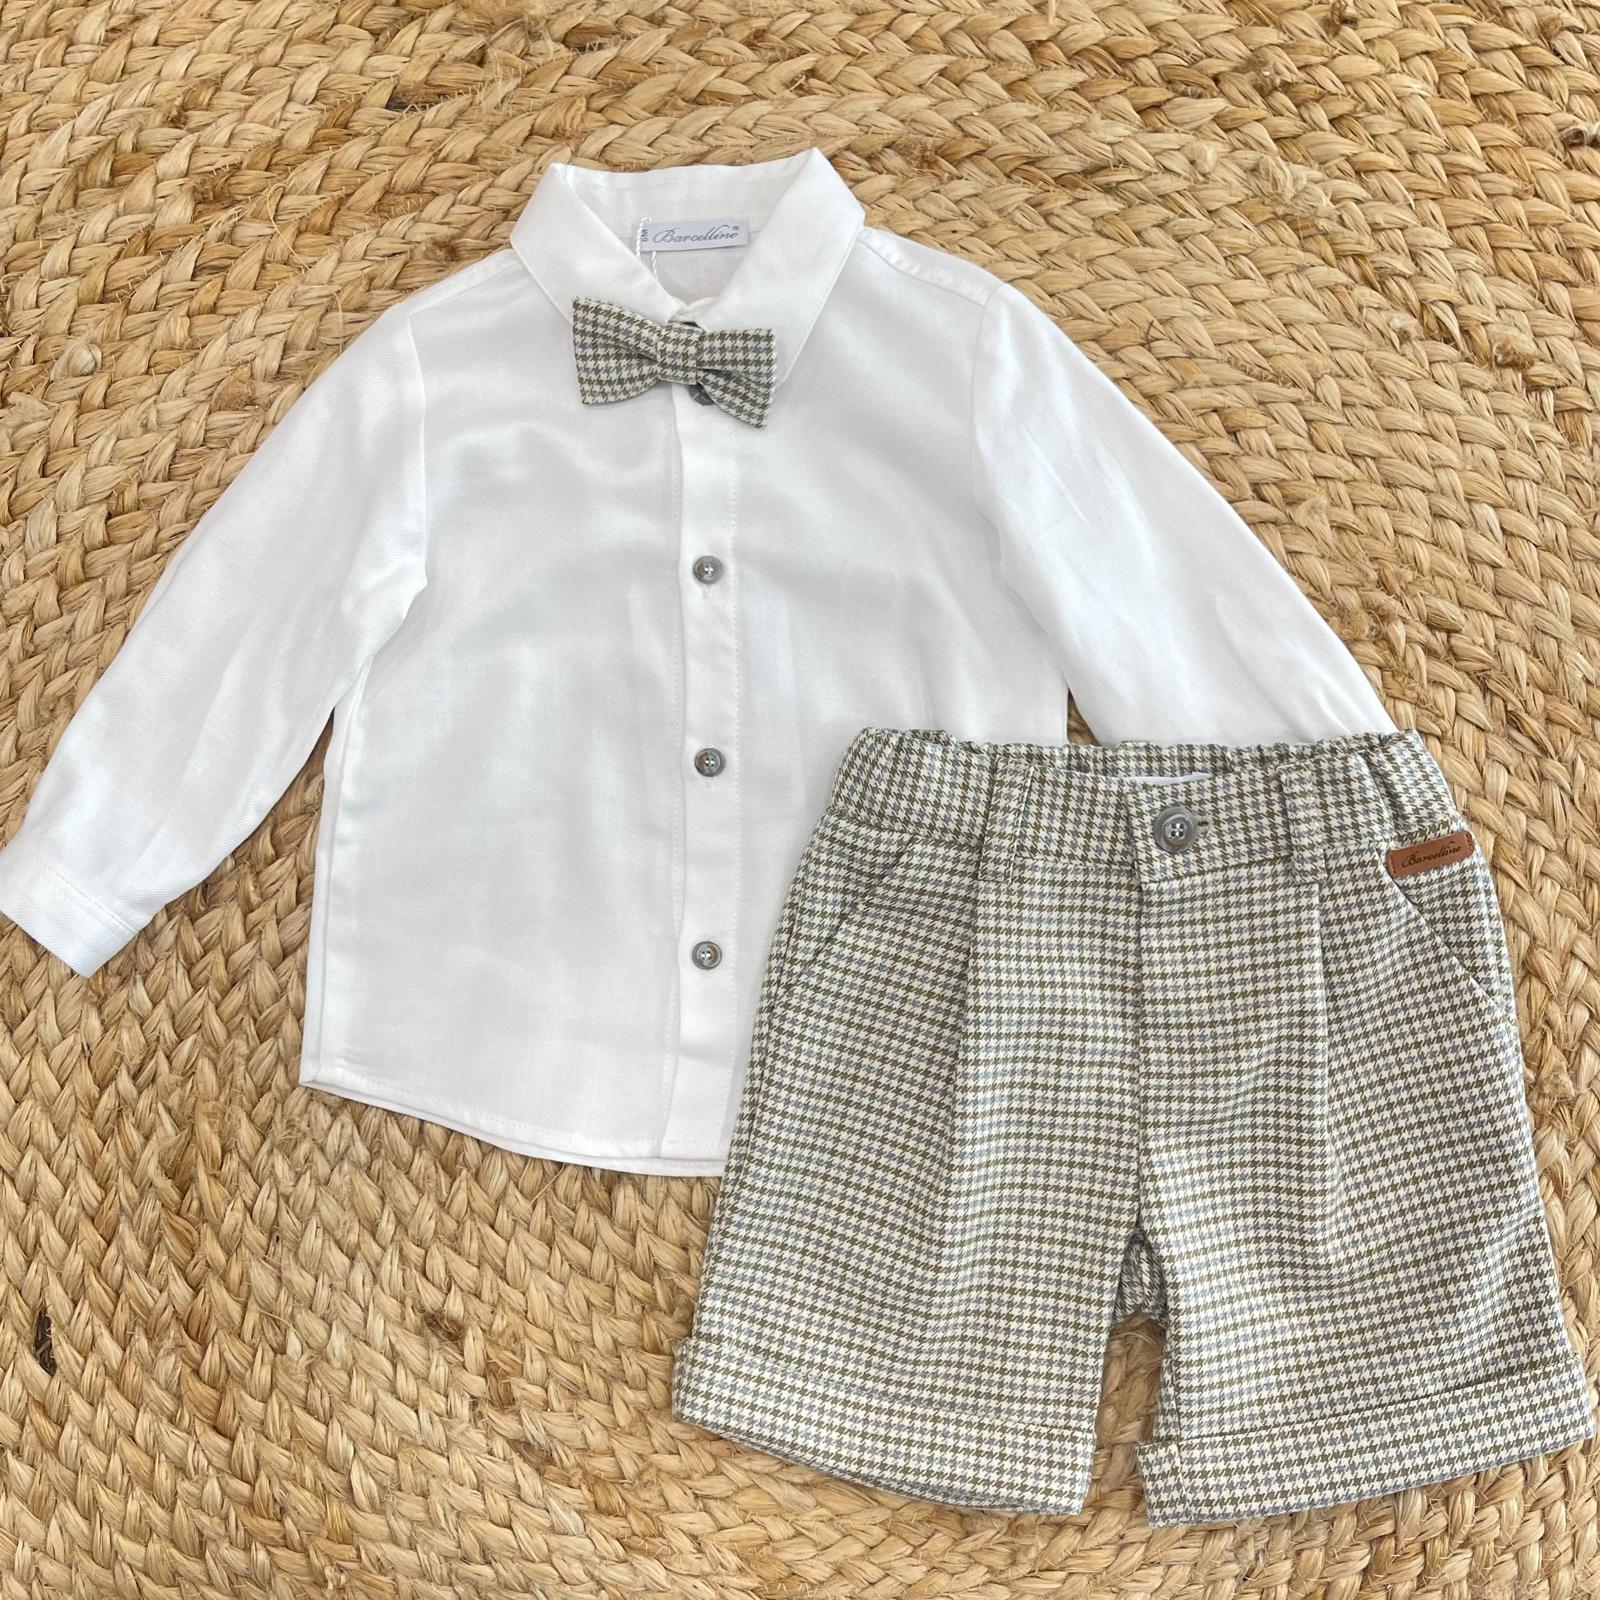 Barcellino Houndstooth outfit